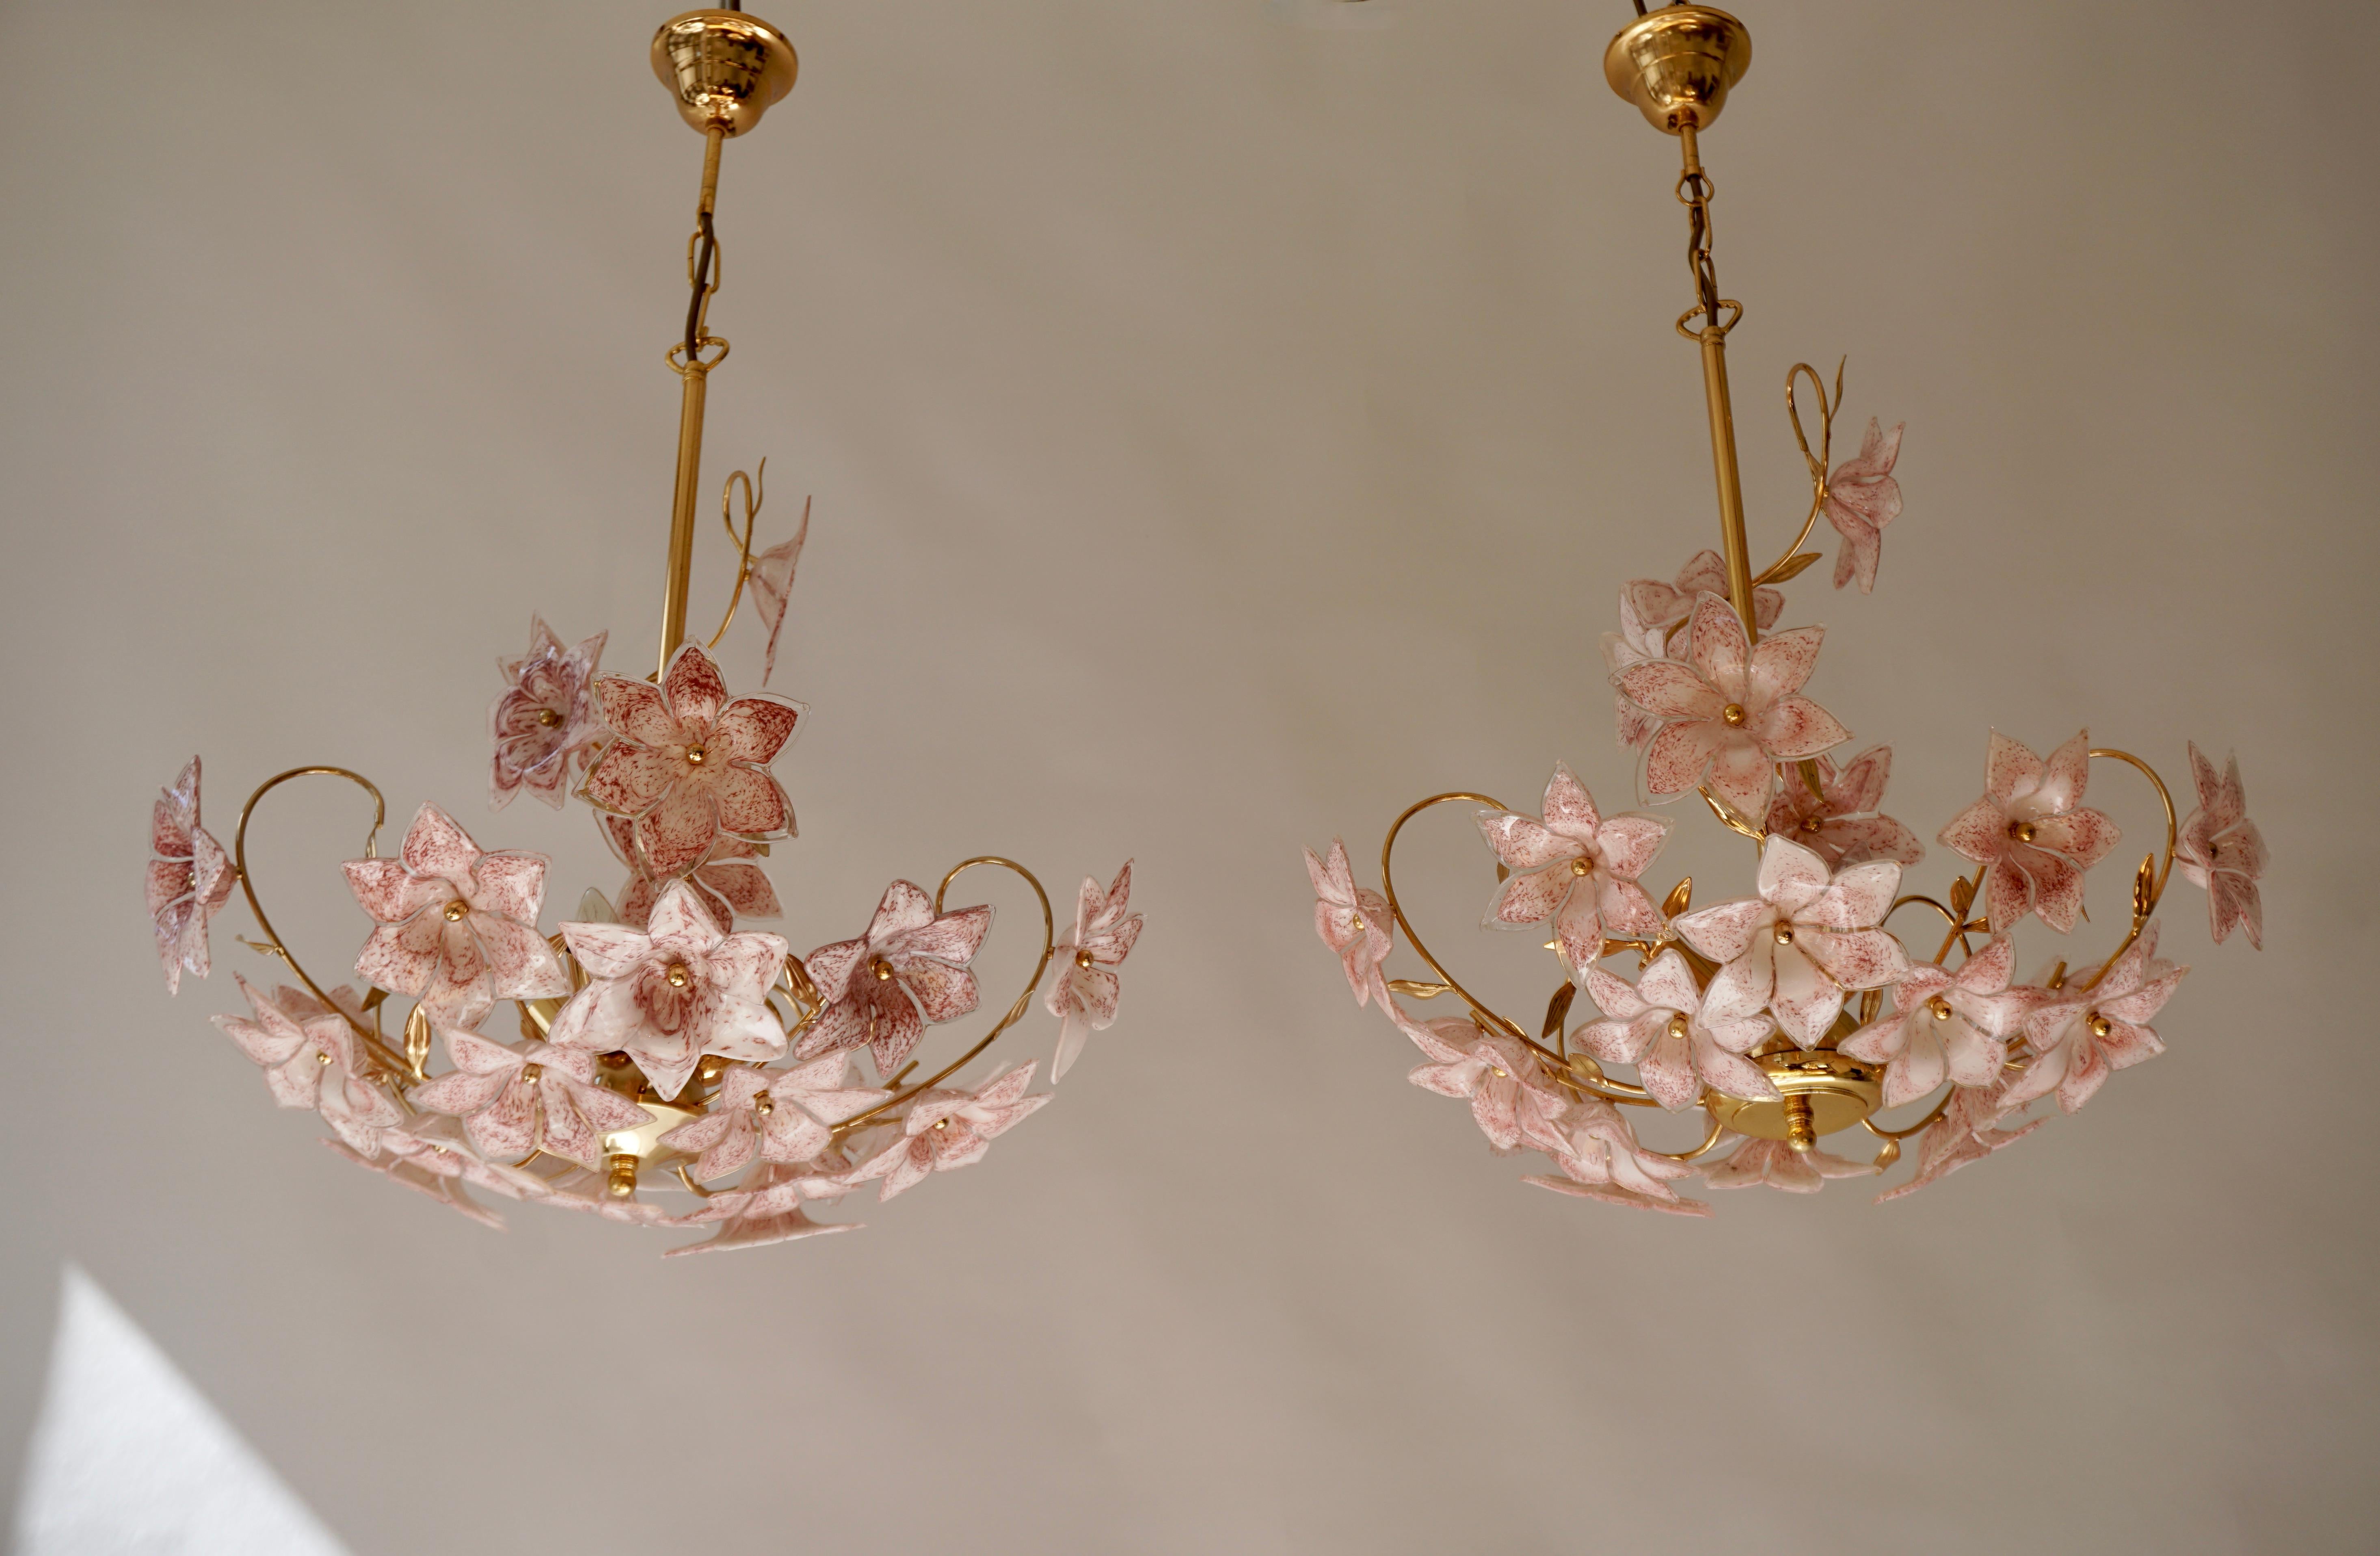 Set of 2 Italian Brass Chandeliers with White Pink Colored Murano Glass Flowers For Sale 1